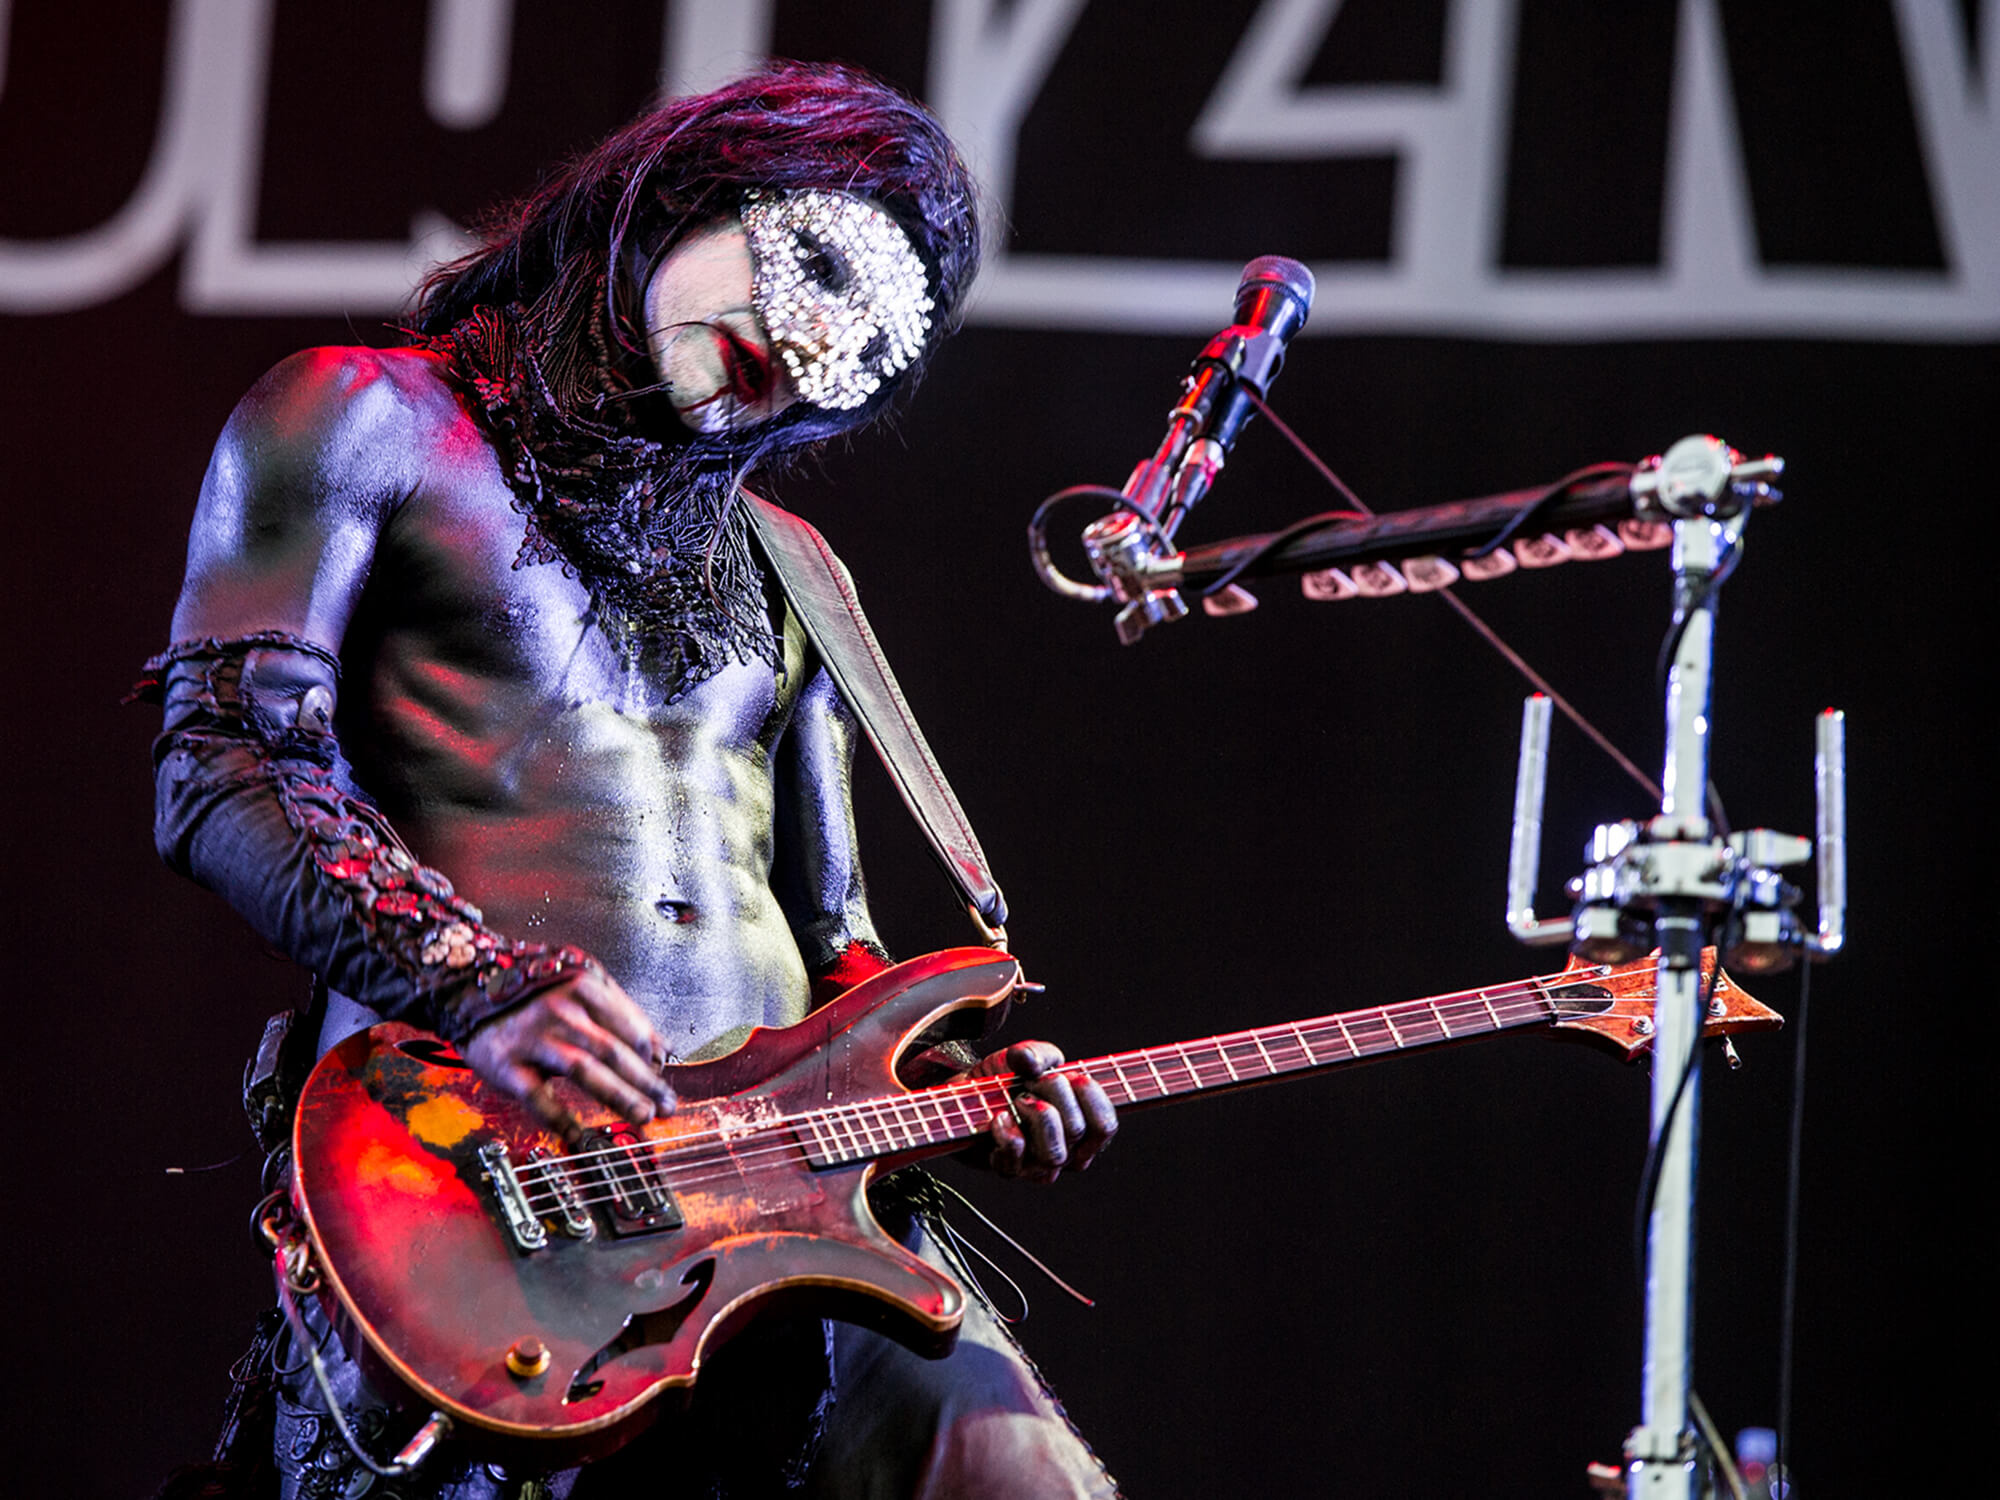 Wes Borland of Limp Bizkit performing at Download Festival in 2013, photo by Ollie Millington/Getty Images